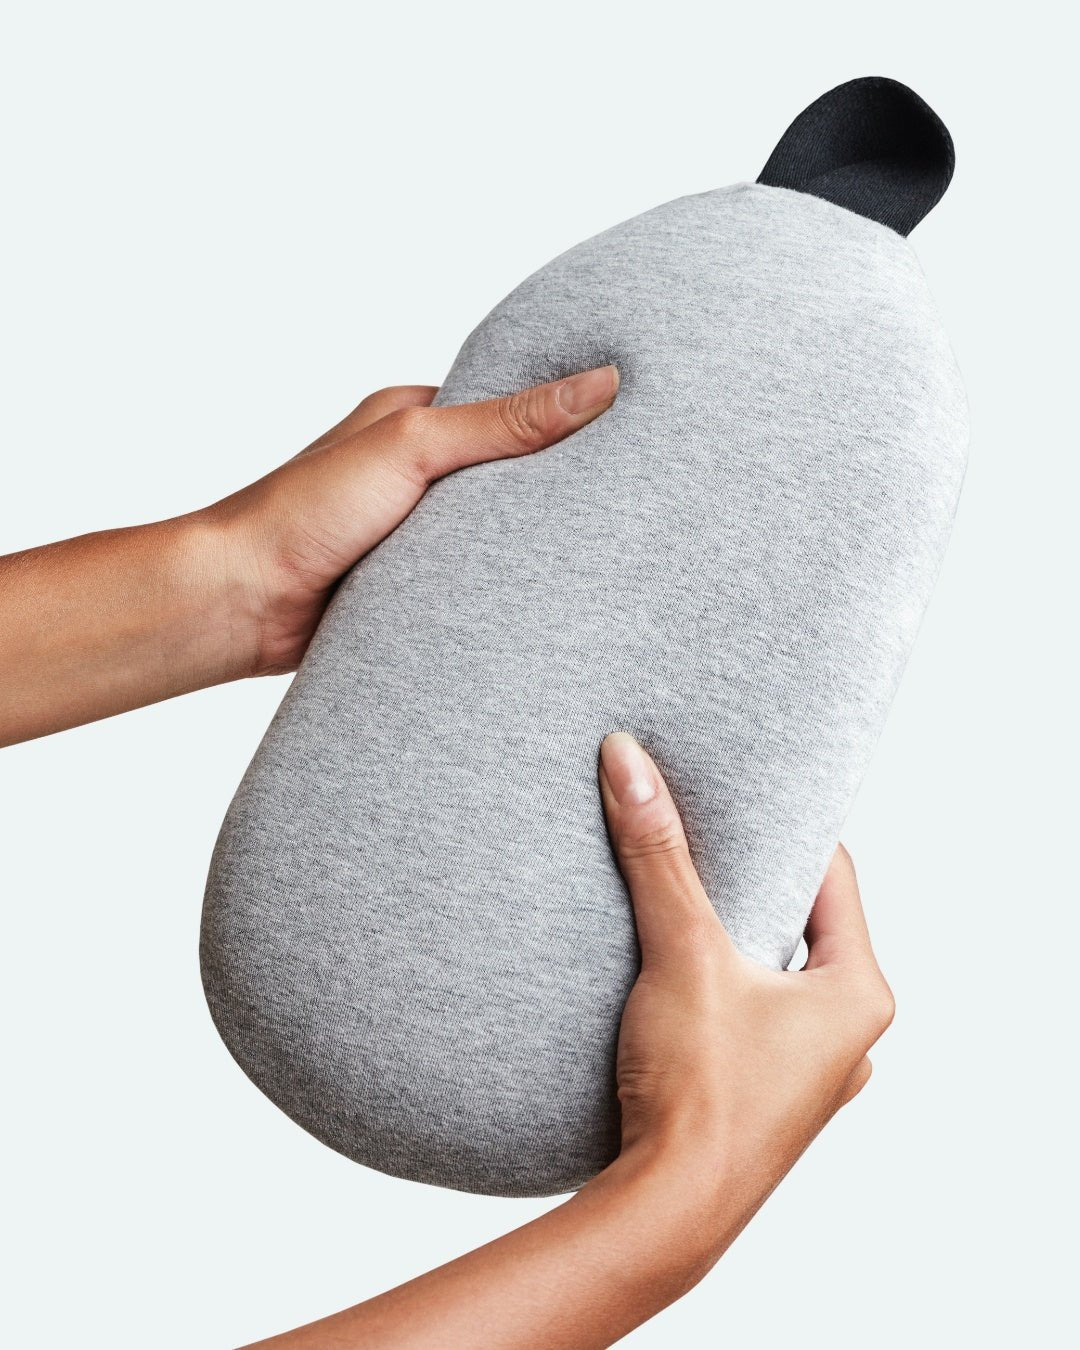 The Homebody Bundle - Ostrichpillow